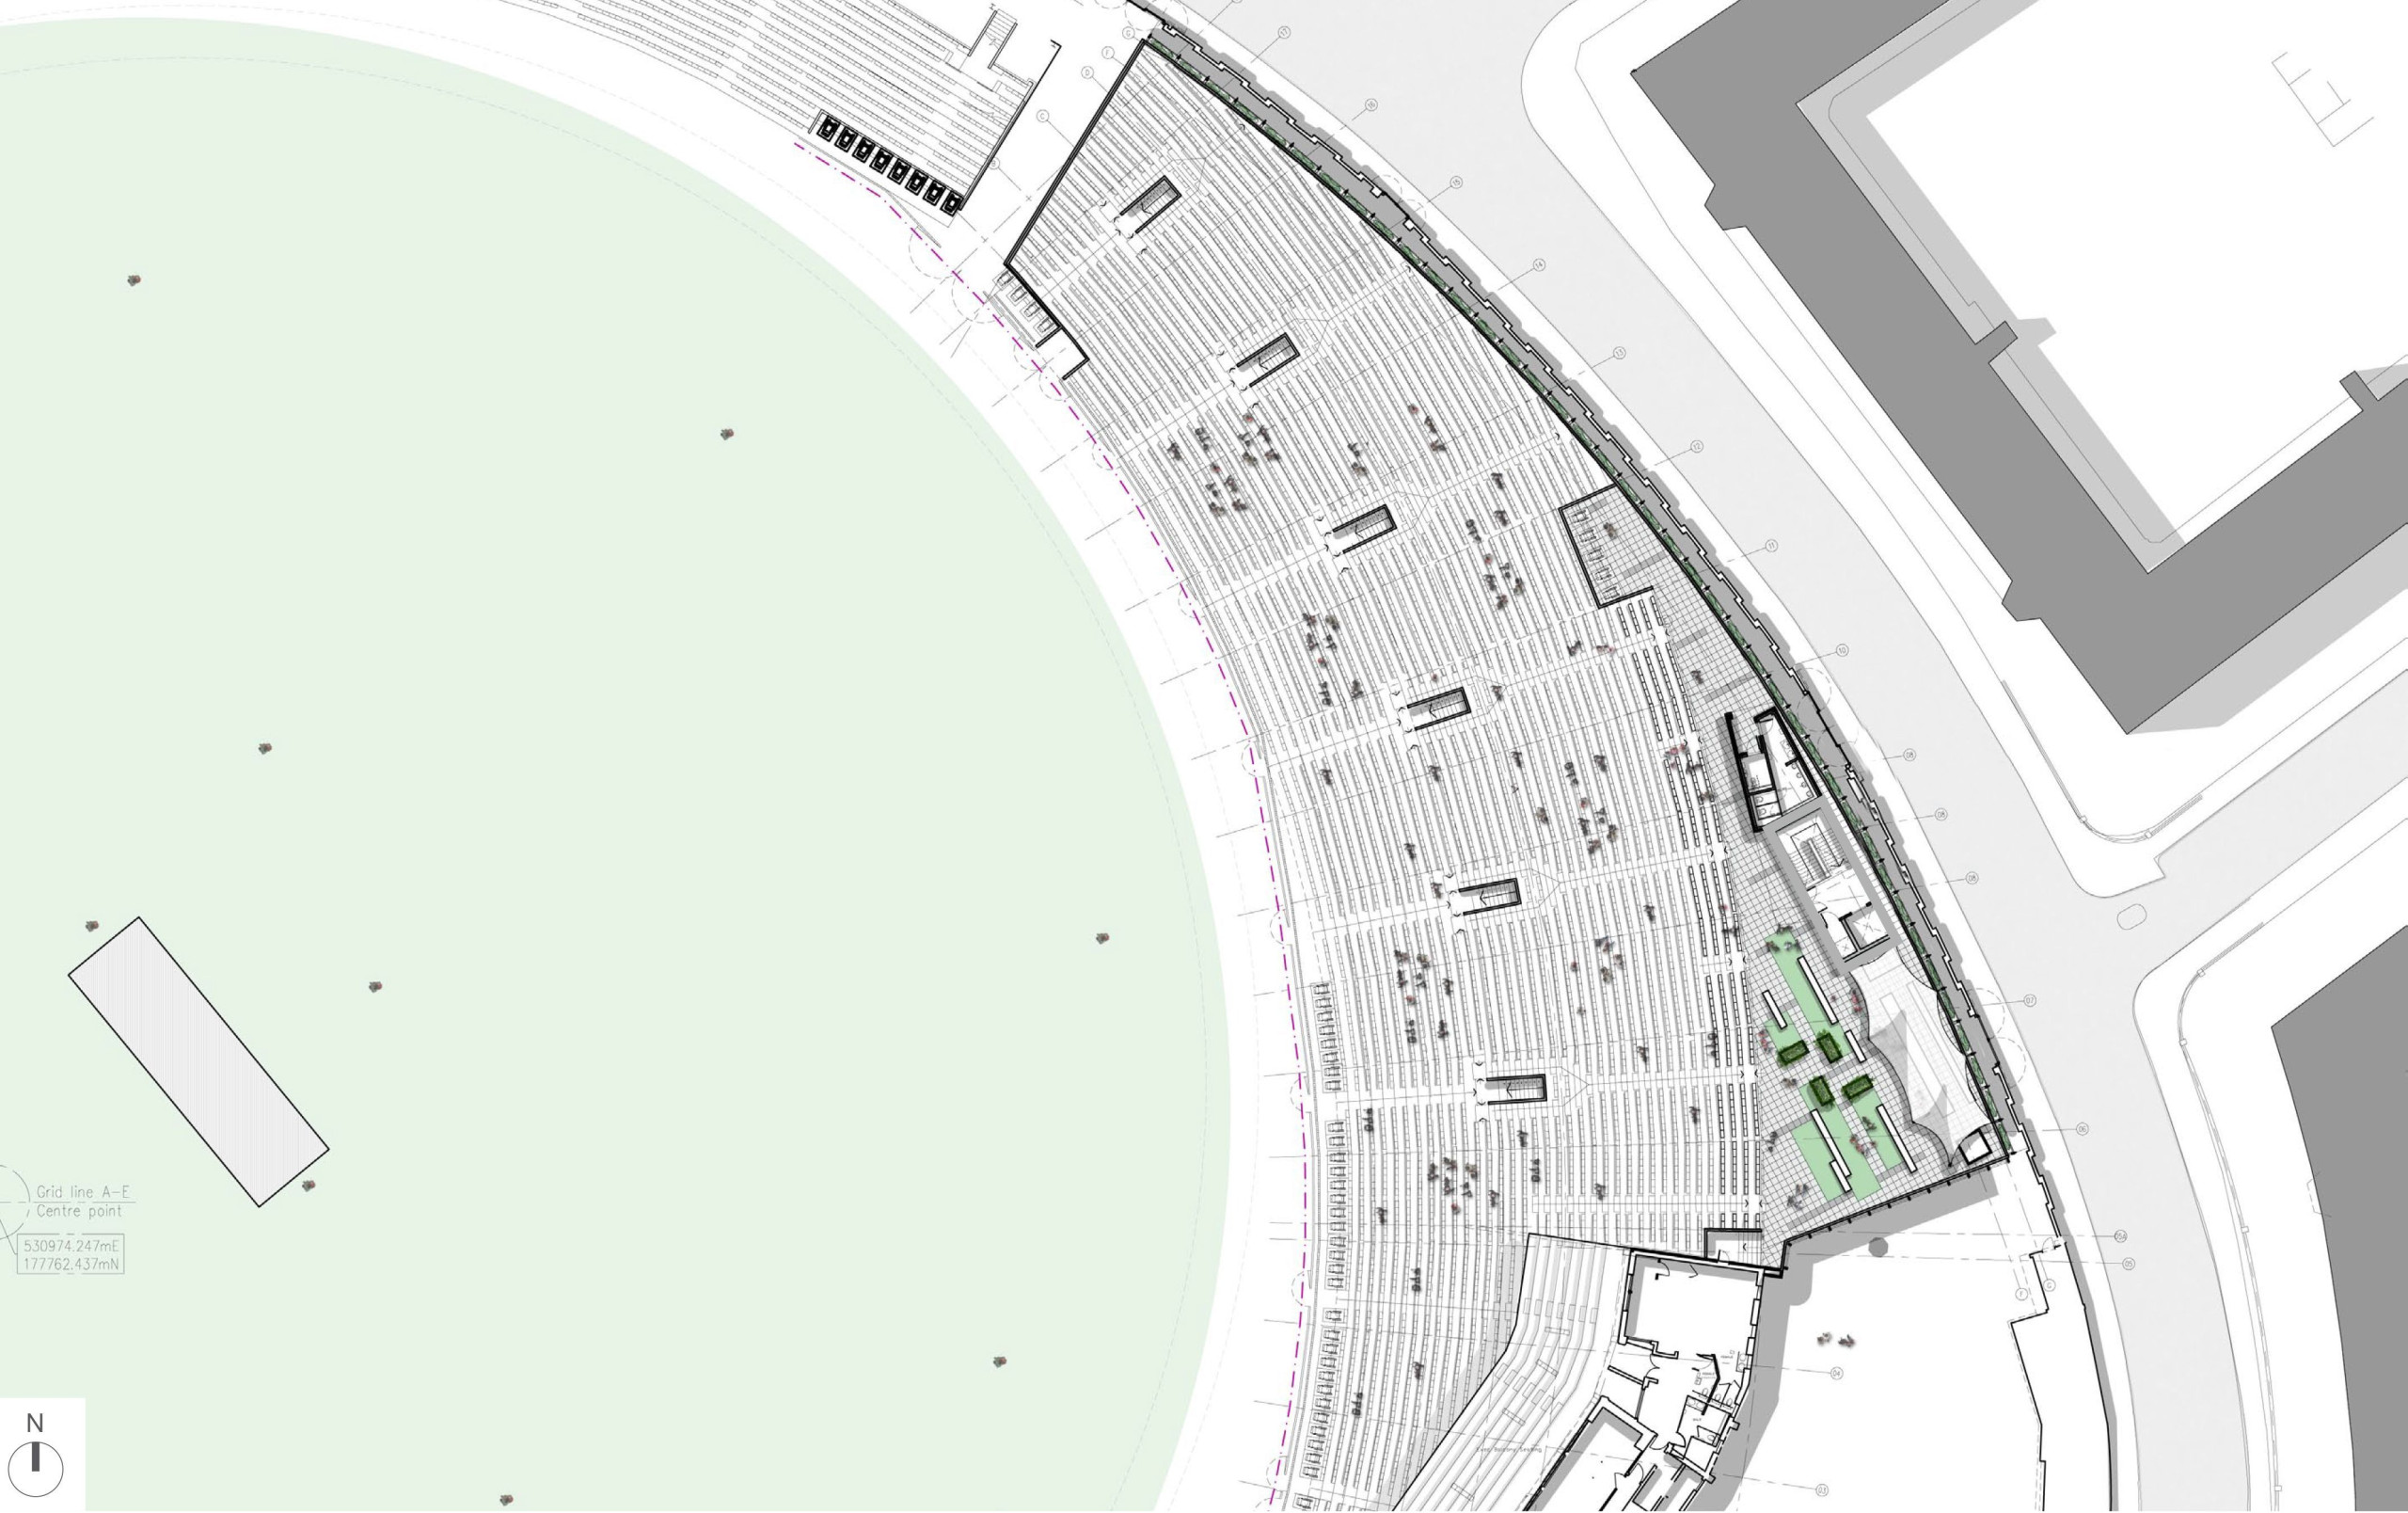 aerial view plans of the Peter may stand within the Kia oval cricket stadium